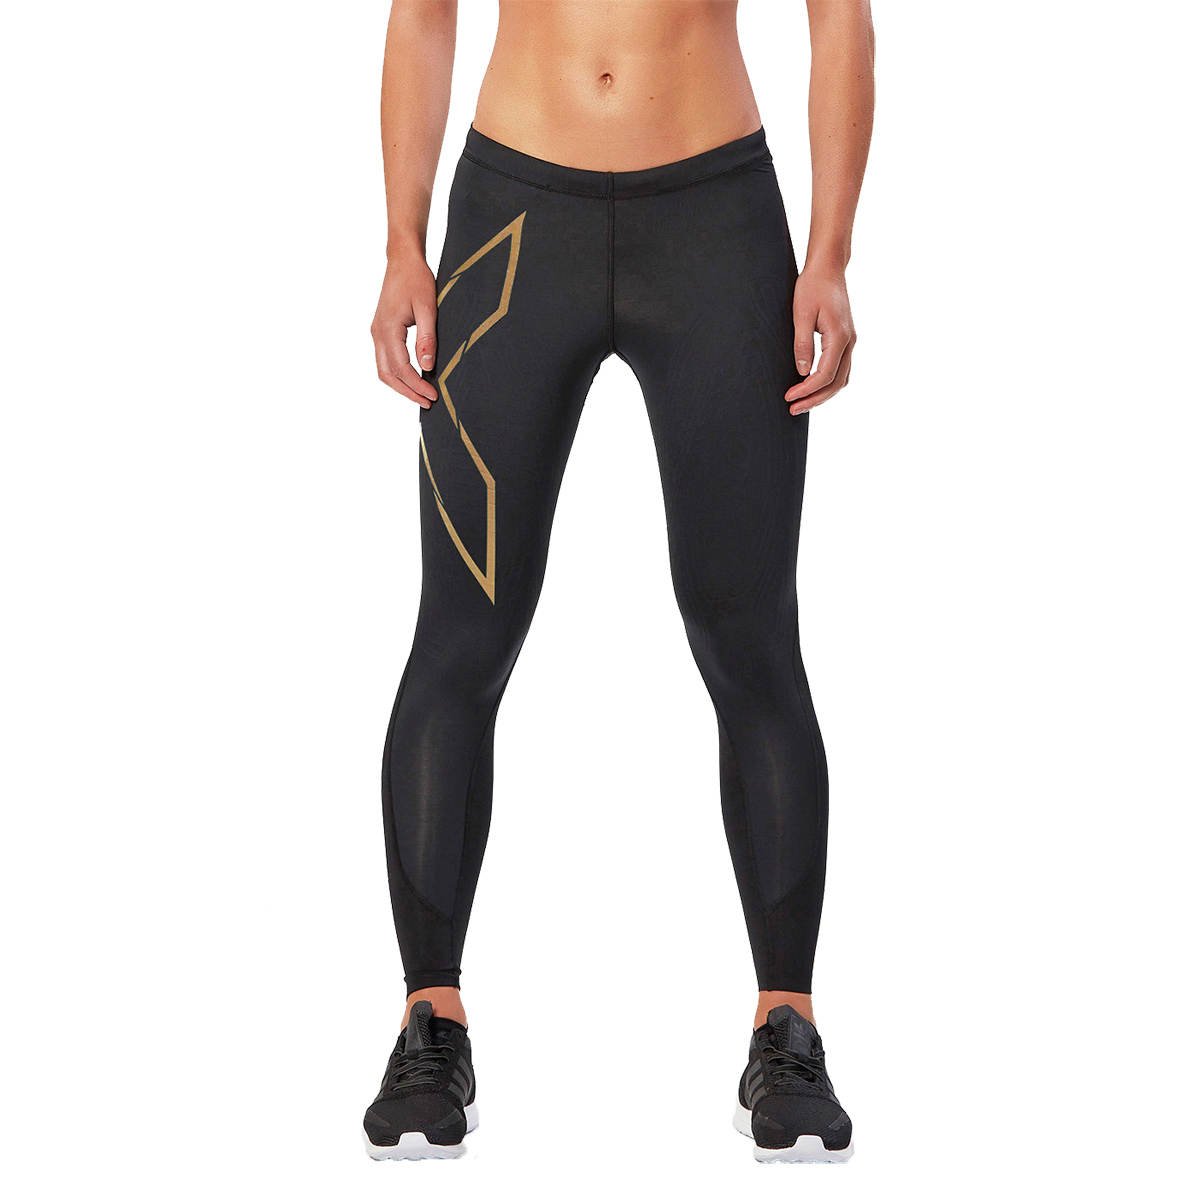 2XU MCS Elite Compression Tight, , large image number null